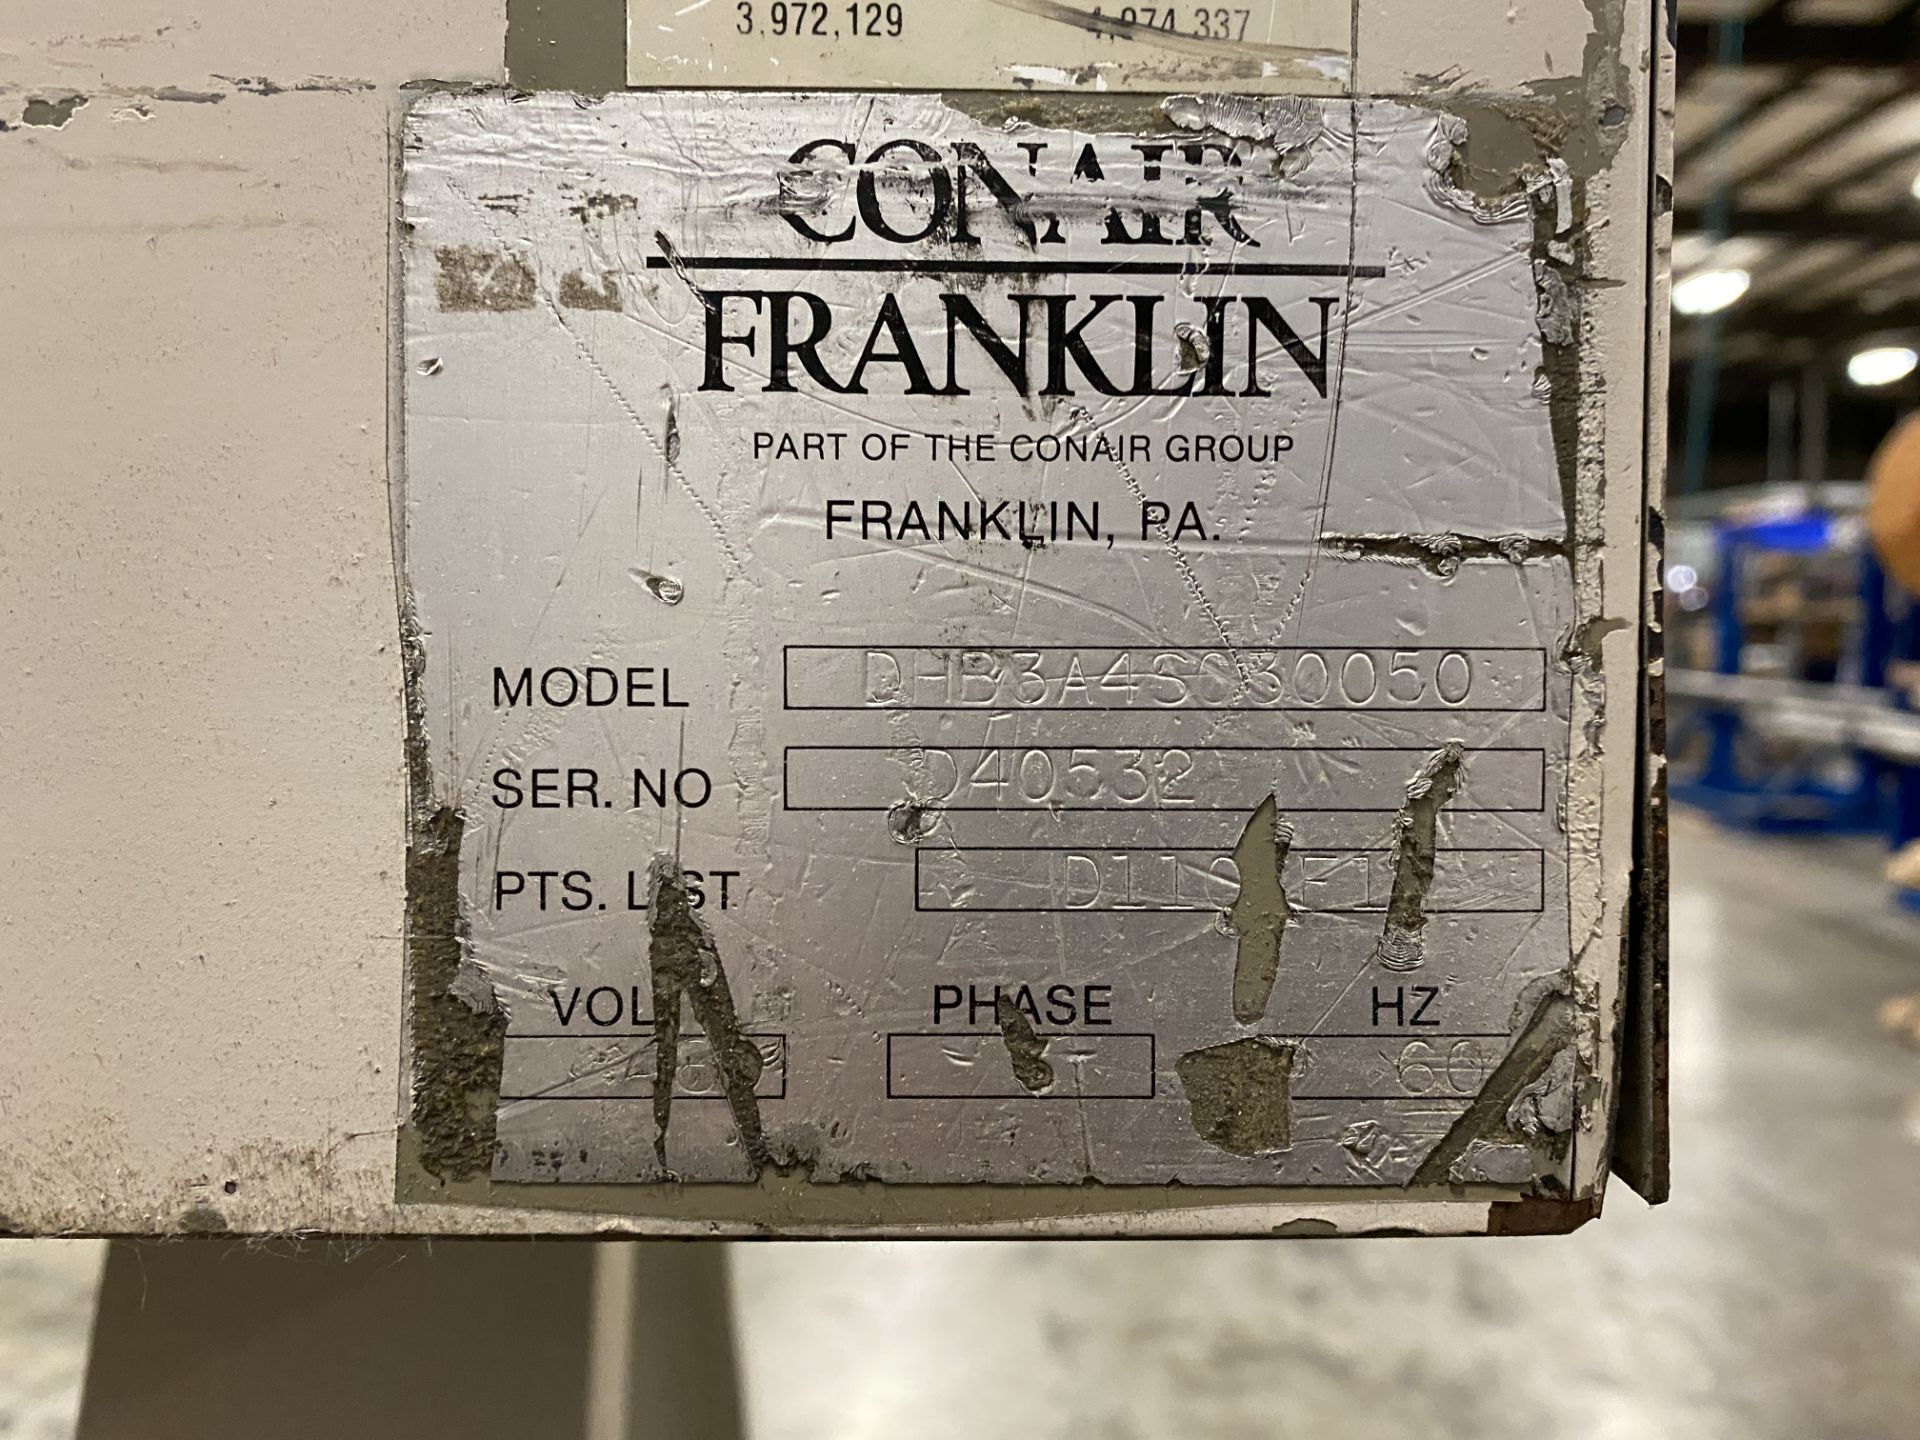 Conair Franklin DHB3A4S030050 Machine Mount Dryer - Image 7 of 8